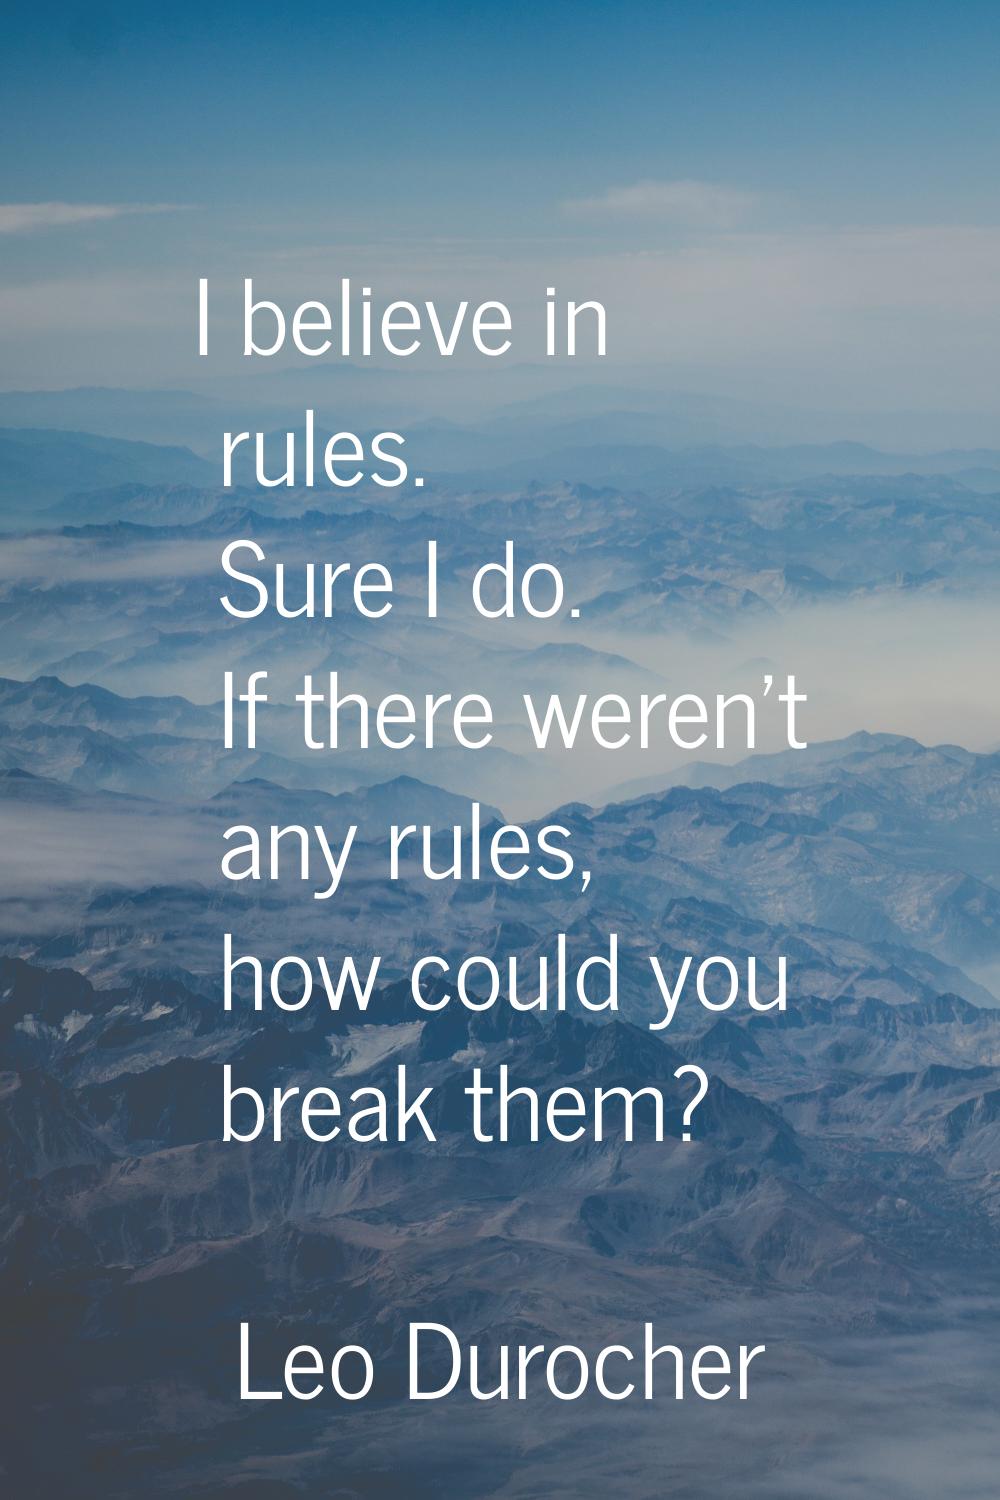 I believe in rules. Sure I do. If there weren't any rules, how could you break them?